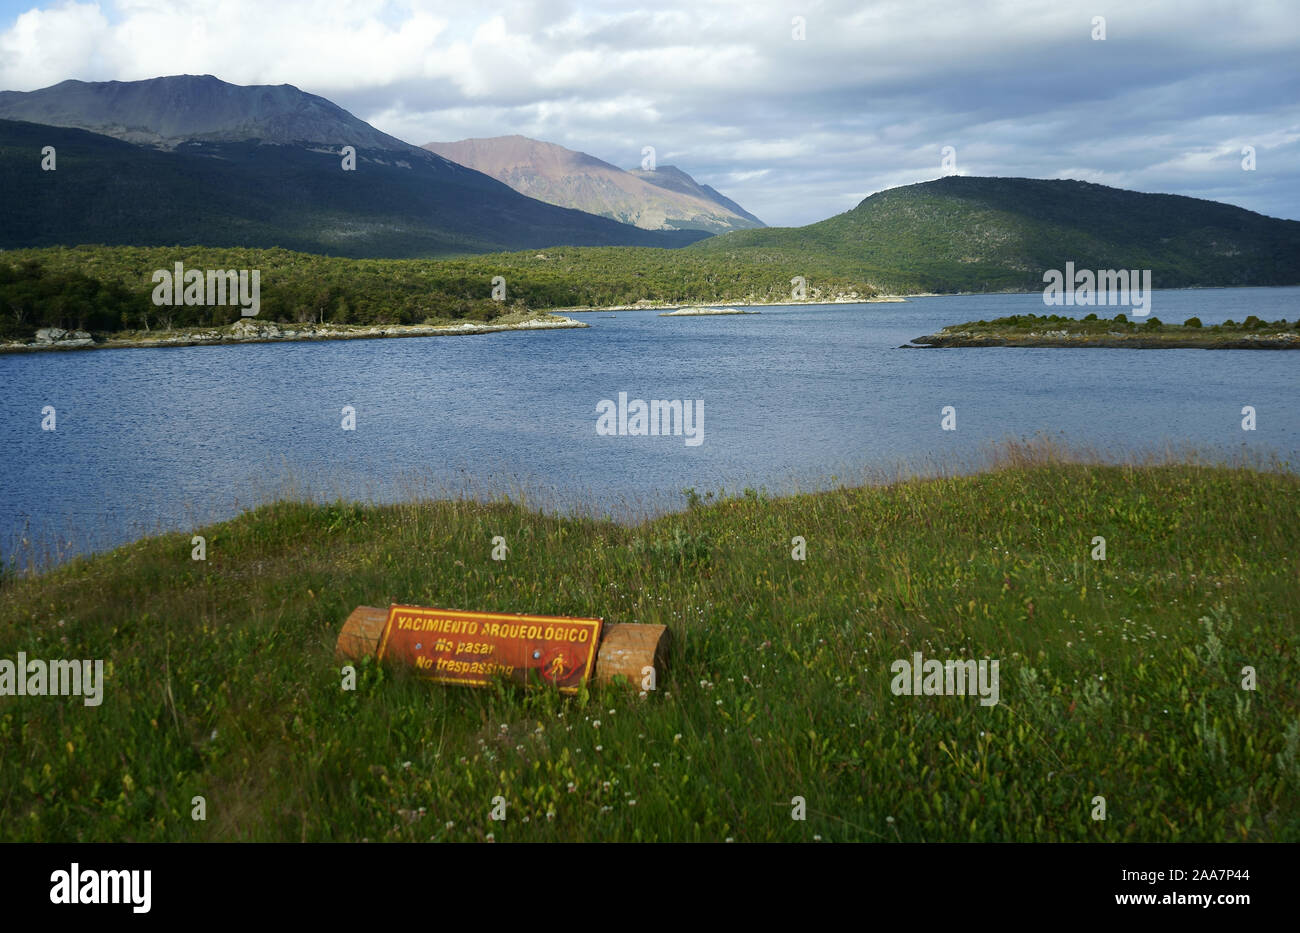 Bahia Lapataia with archaeological site sign, Tierra del Fuego National Park, Argentina Stock Photo